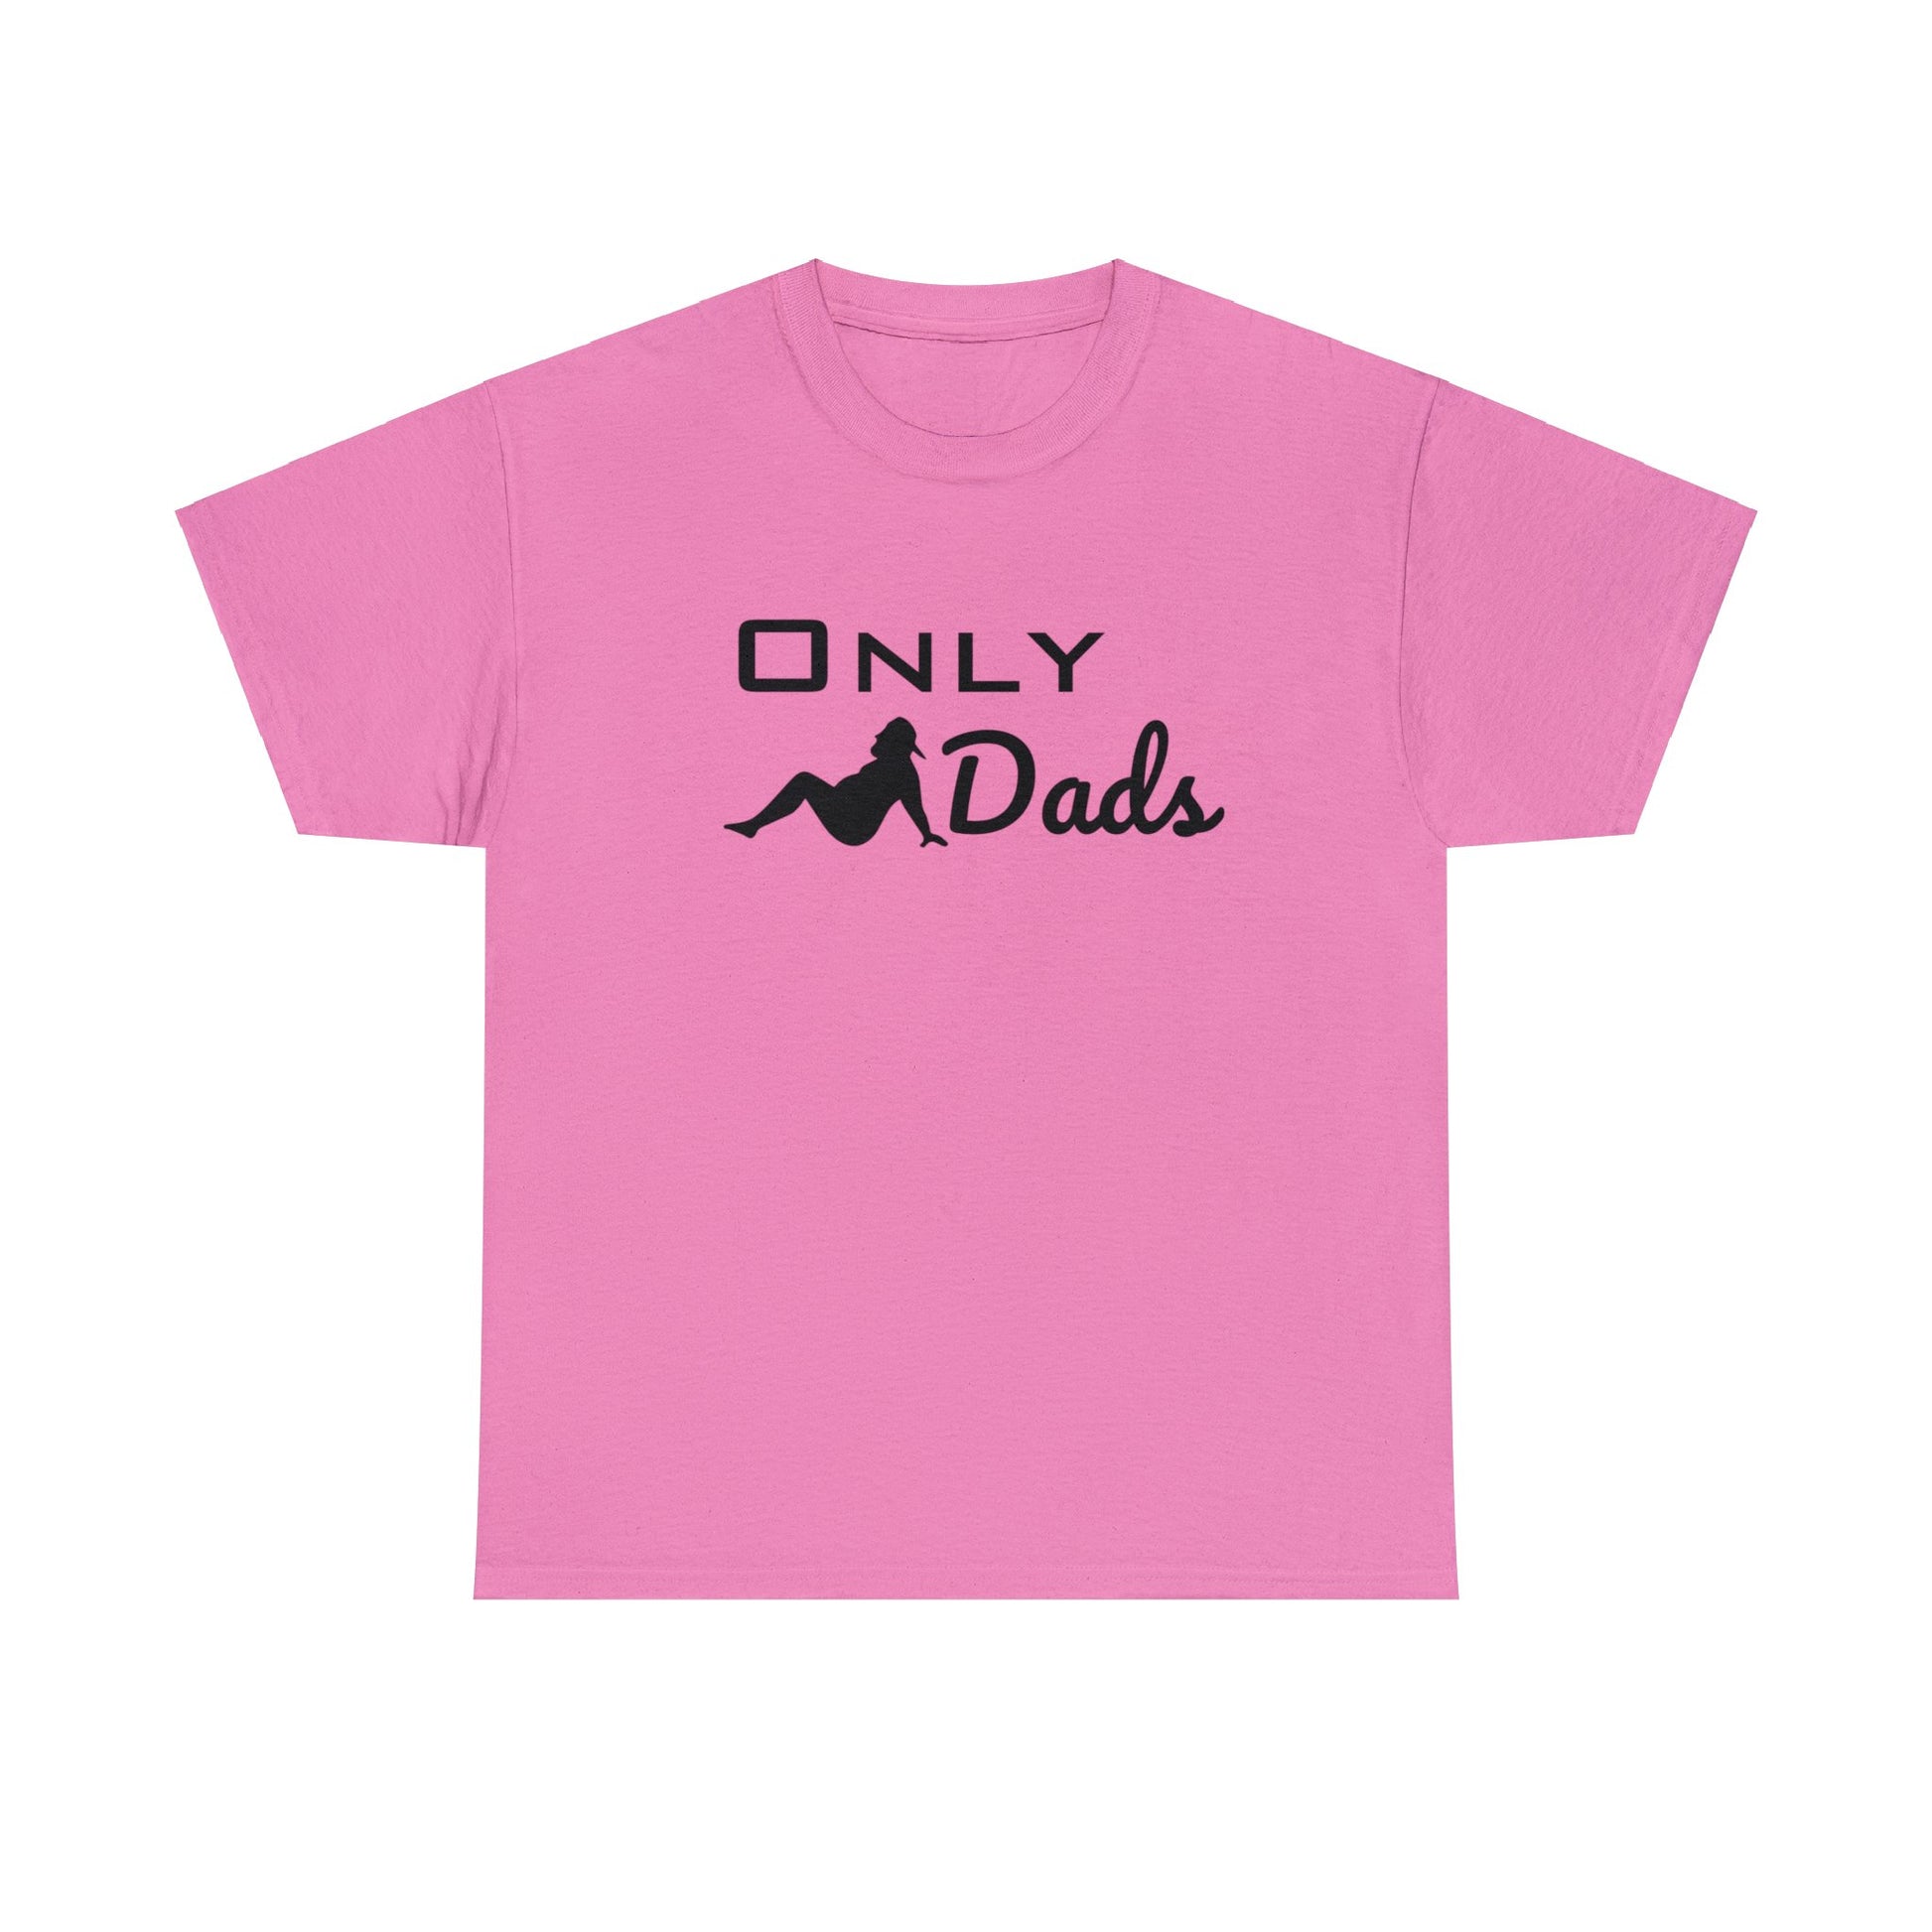 Classic fit "Only Dads" t-shirt with no side seams for everyday comfort.